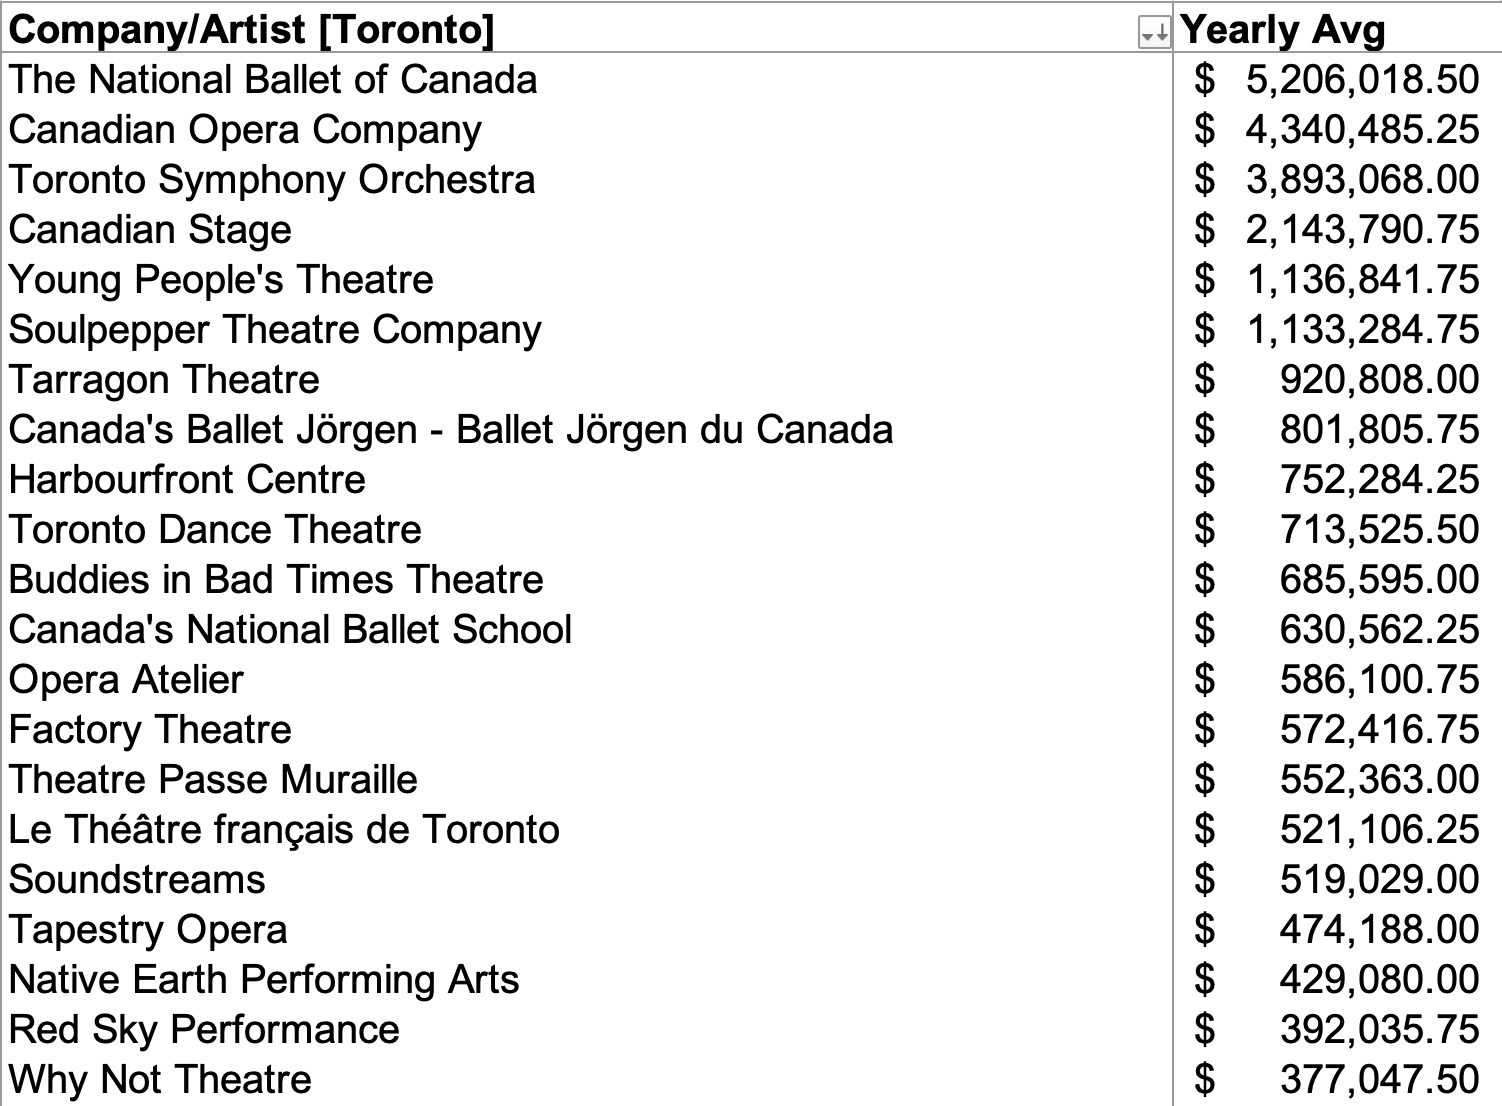 graphic of canadian theatres and they're yearly income